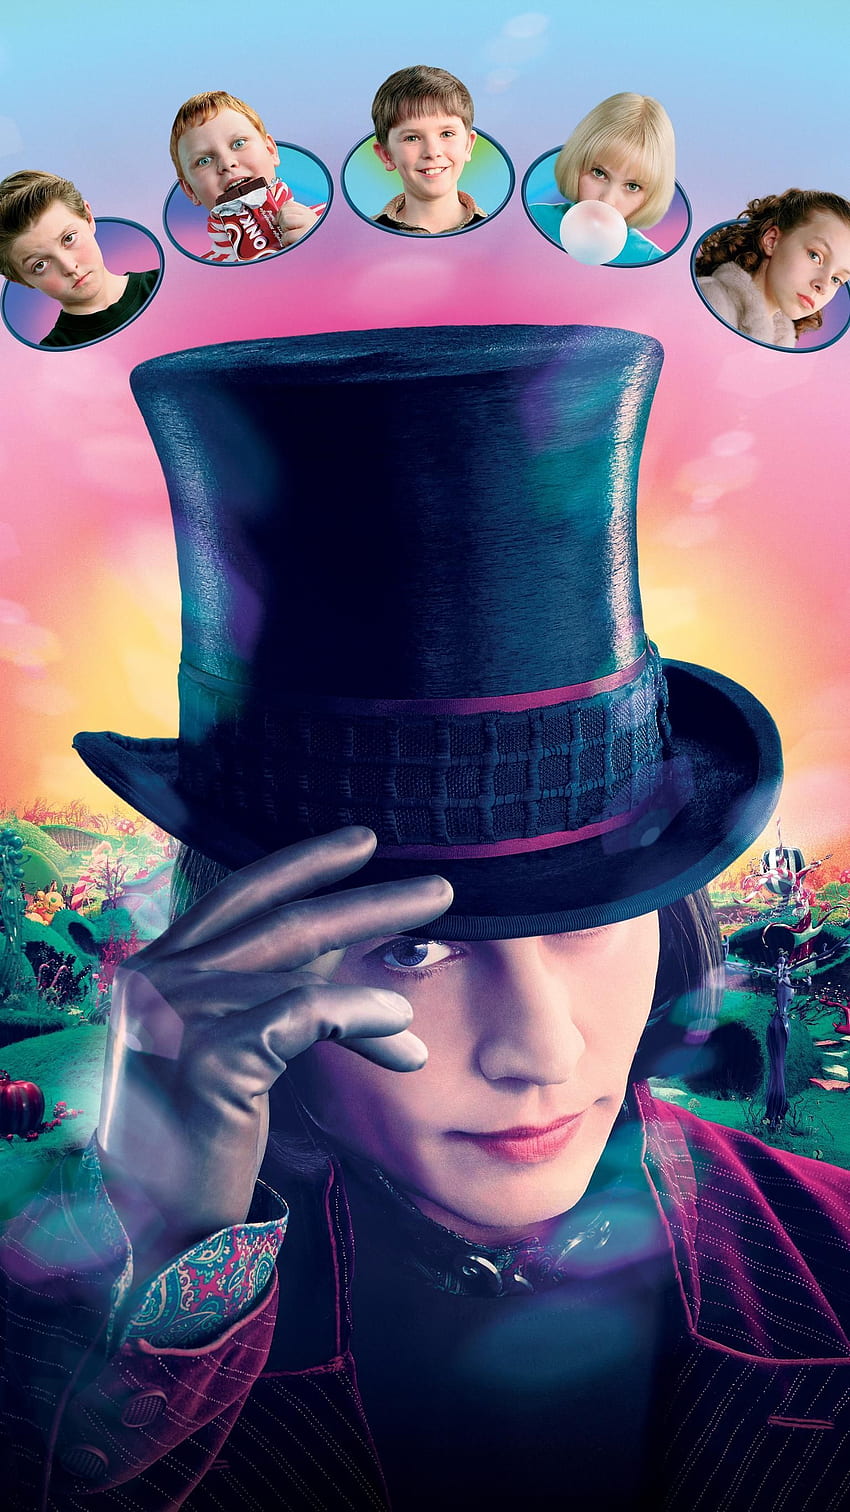 Charlie and the Chocolate Factory (2005) Phone . Moviemania. Johnny depp movies, Chocolate factory, Good movies HD phone wallpaper